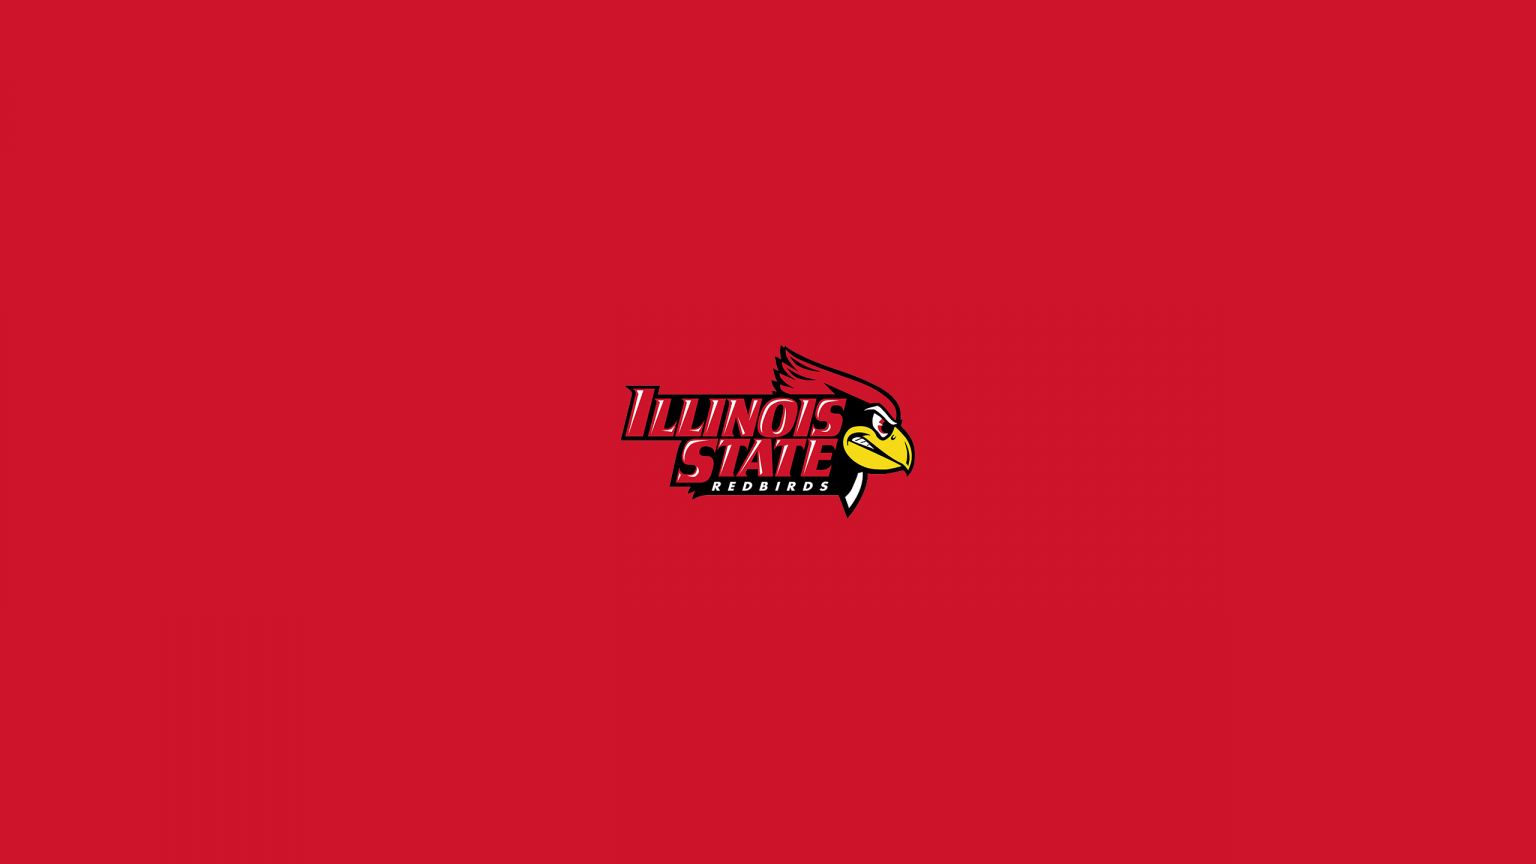 Illinois State Redbirds Basketball - NCAAB - Square Bettor